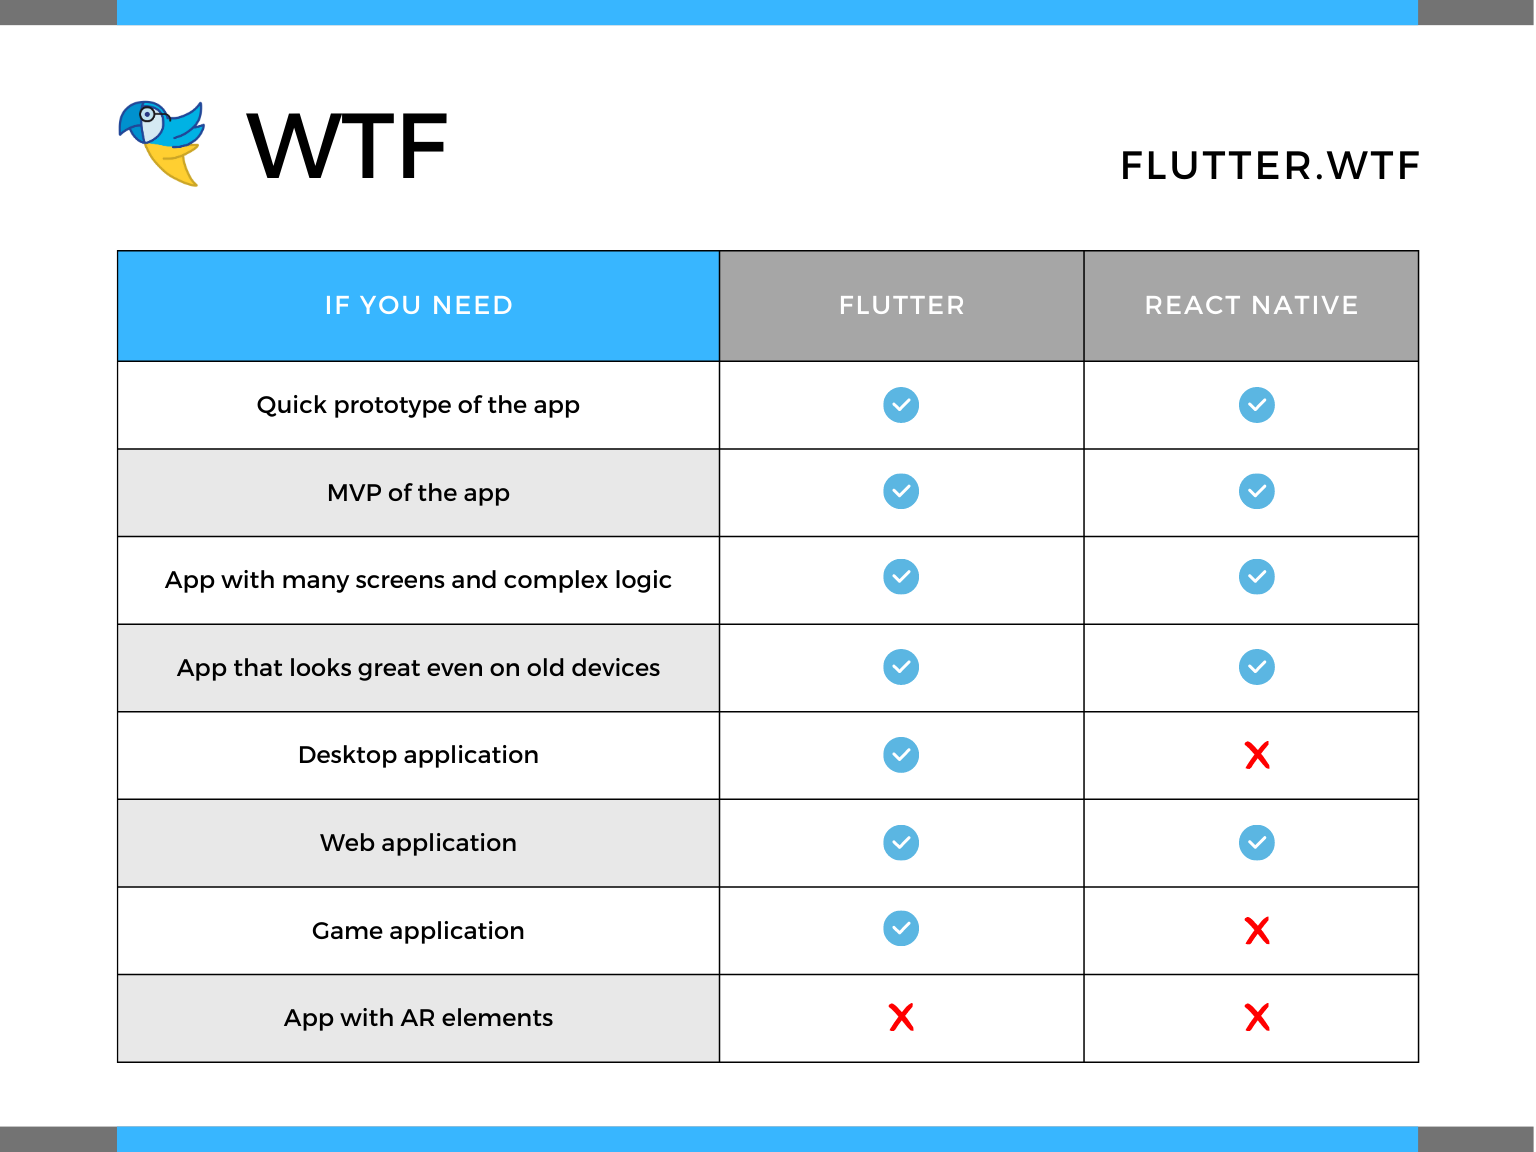 Usage of Flutter and React Native